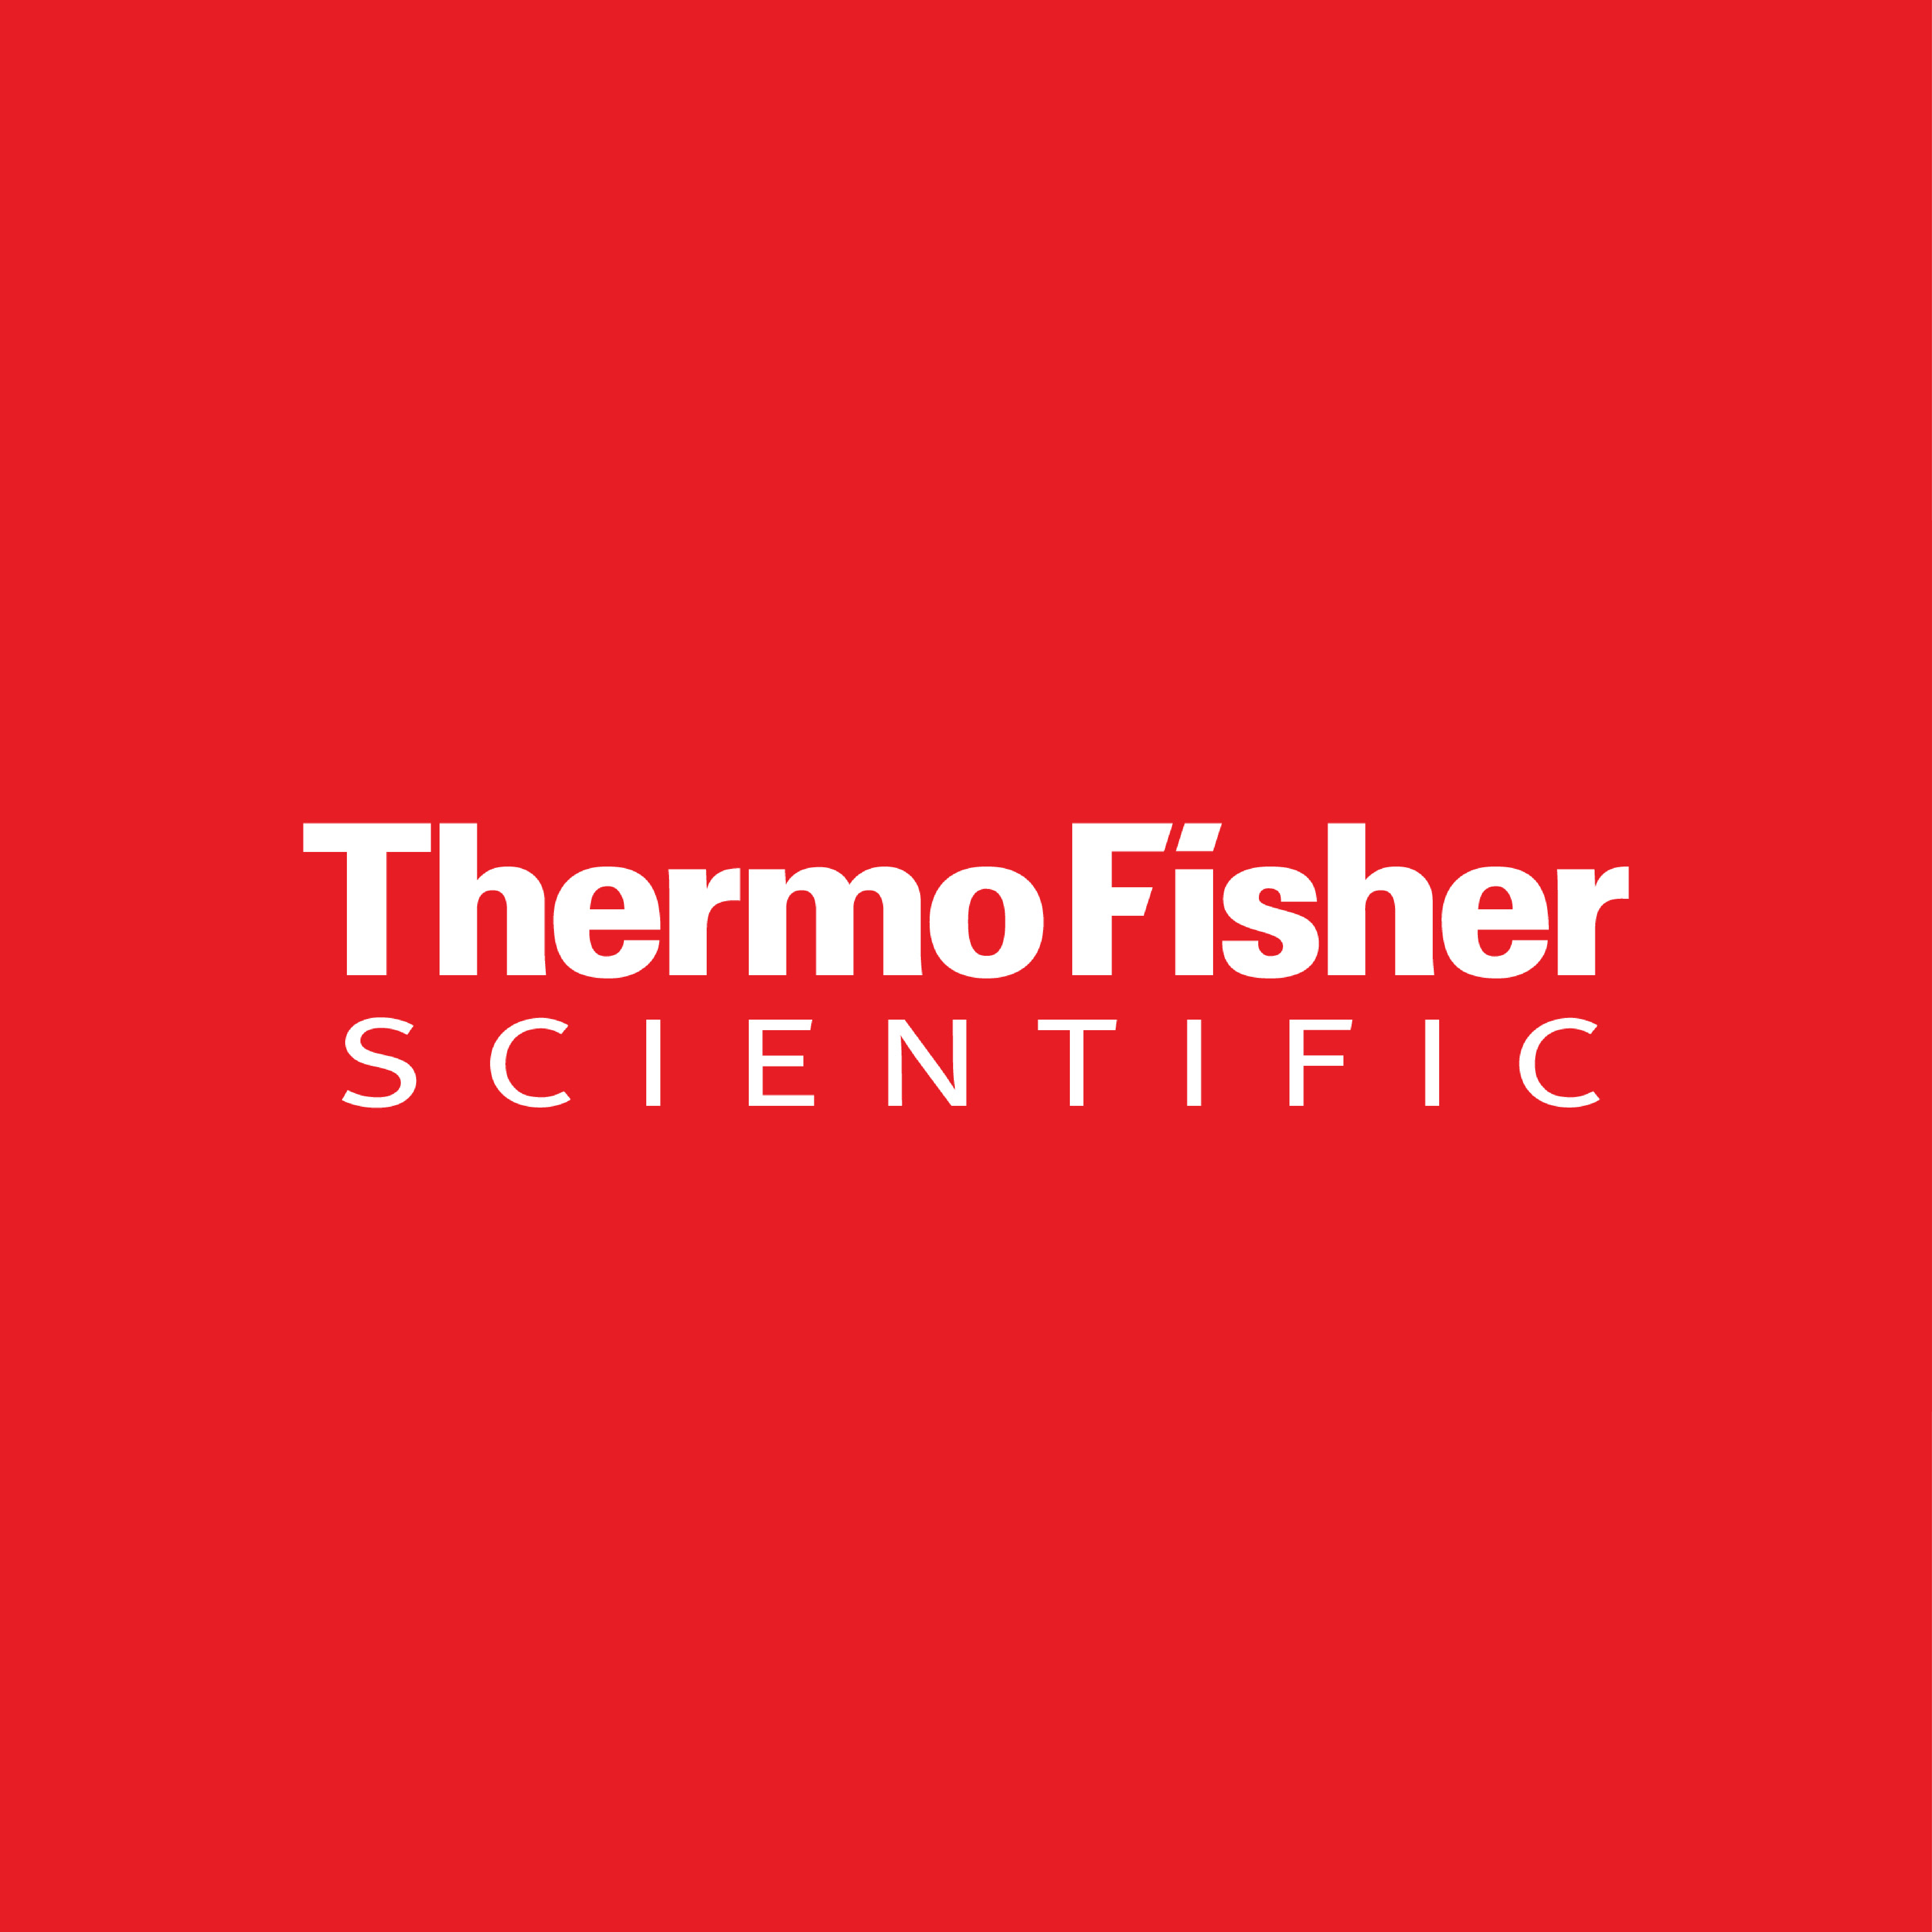 Electron Microscopy Day: Presented by Thermo Fisher Scientific in partnership with Blue Scientific